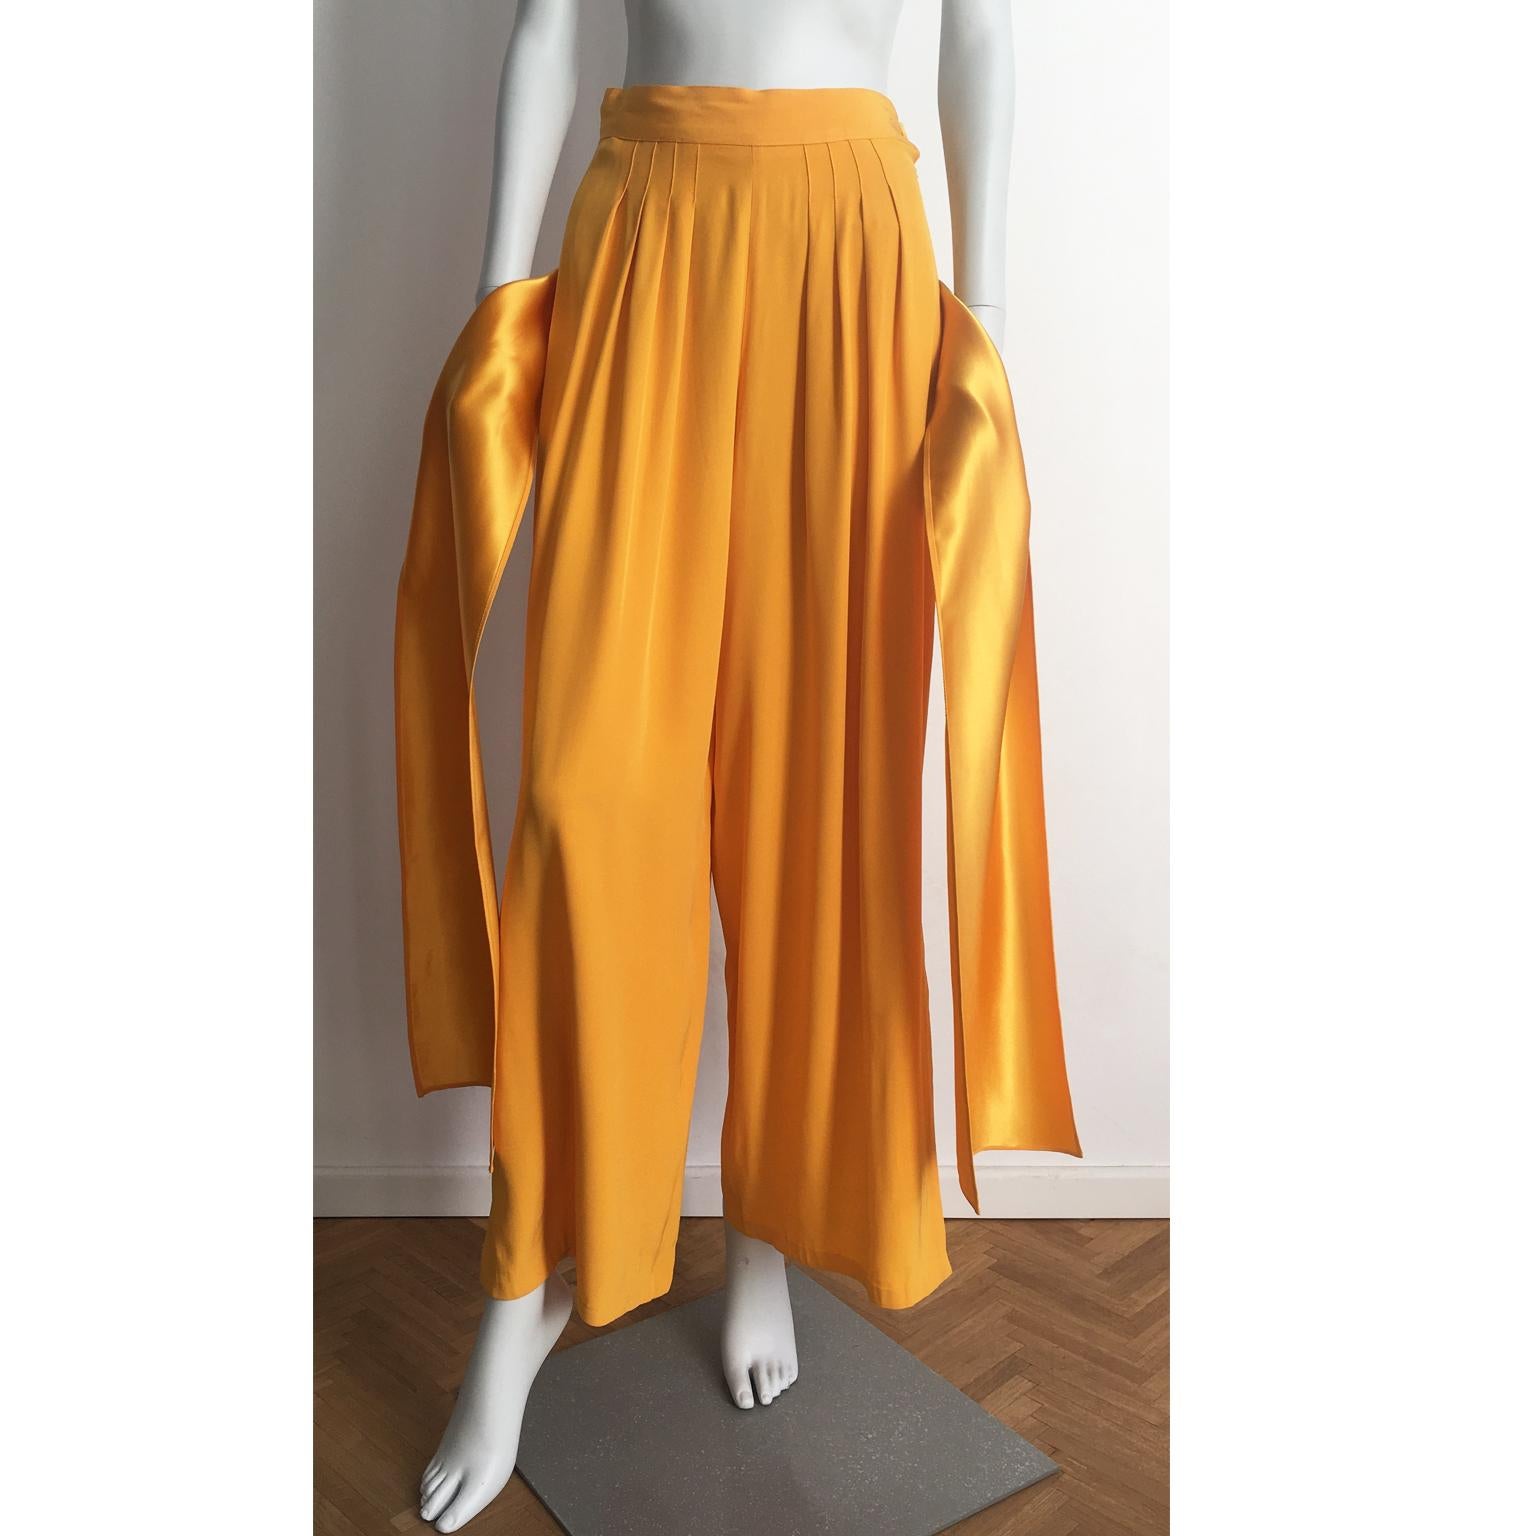 Yves saint Laurent sunflower yellow chic trouser in his signature satin.
The wide leg, side split trouser with a long attached sash in the back.   
Size 6 US. Very Good condition. Made in France.

Measurements ;
Length : 104 cm
Waist : 83 cm
